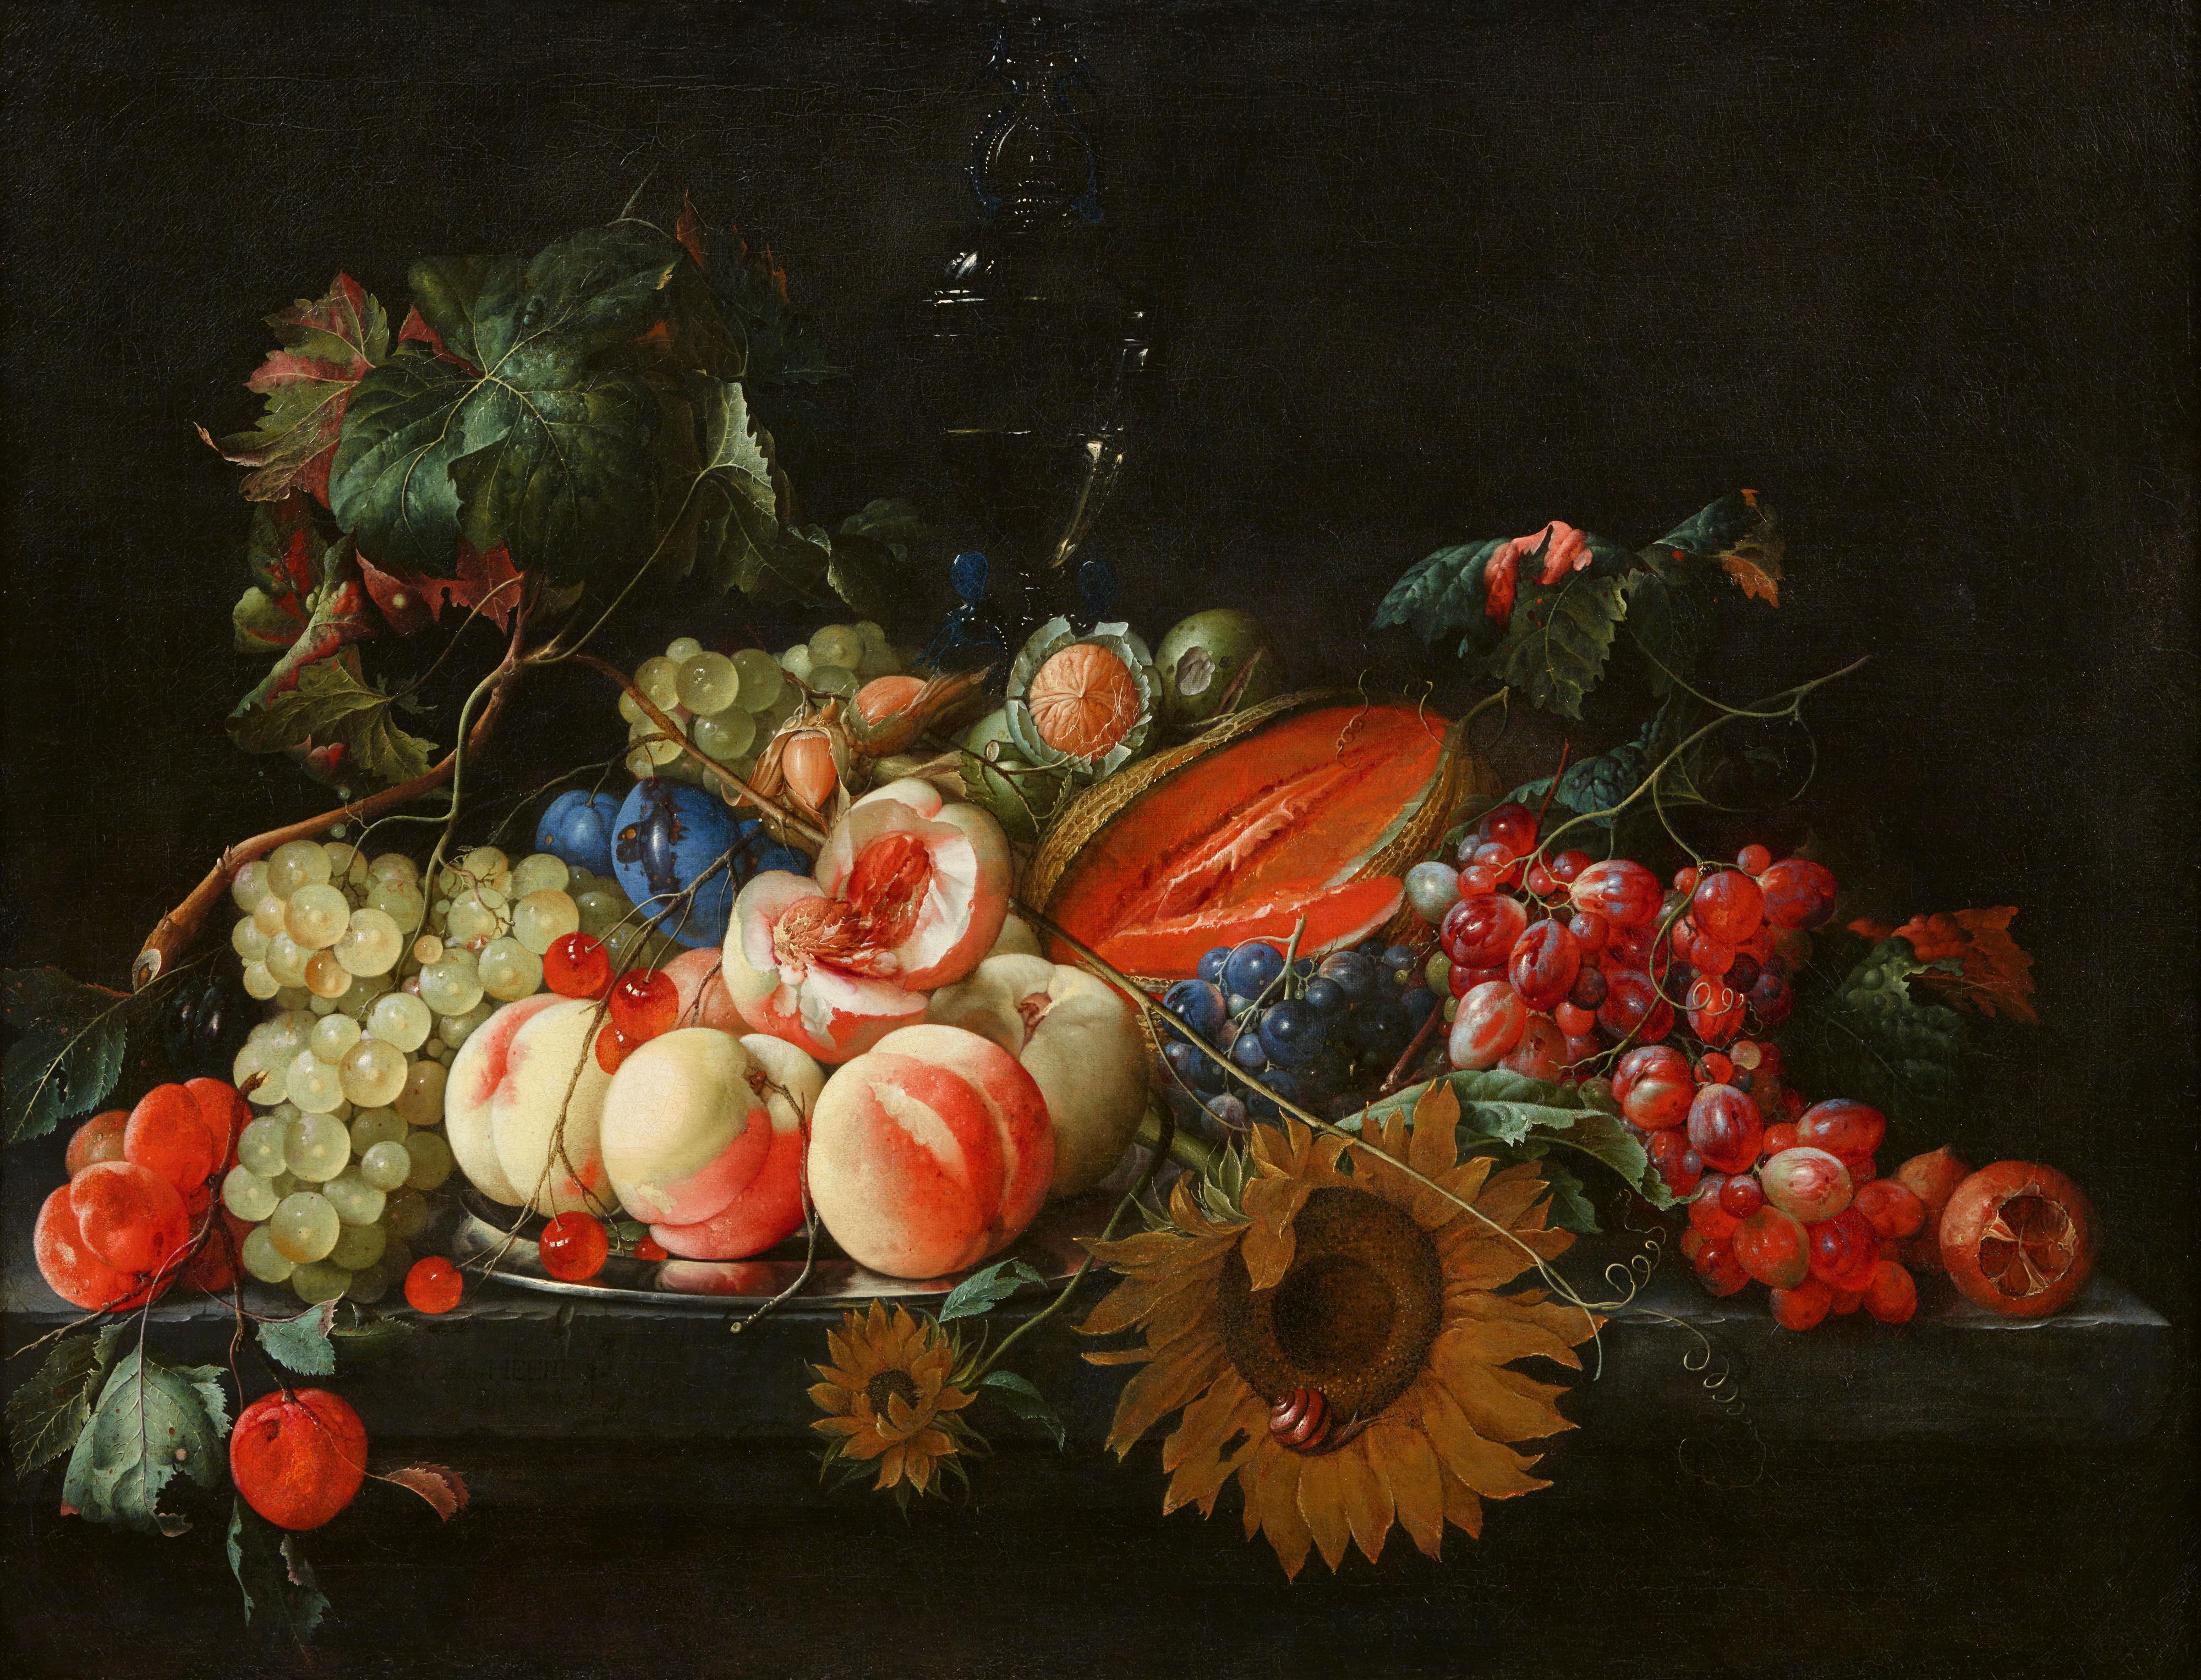 Cornelis de Heem - Still Life of Peaches and Cherries on a Salver with other Fruits, Nuts and Sunflowers - image-1